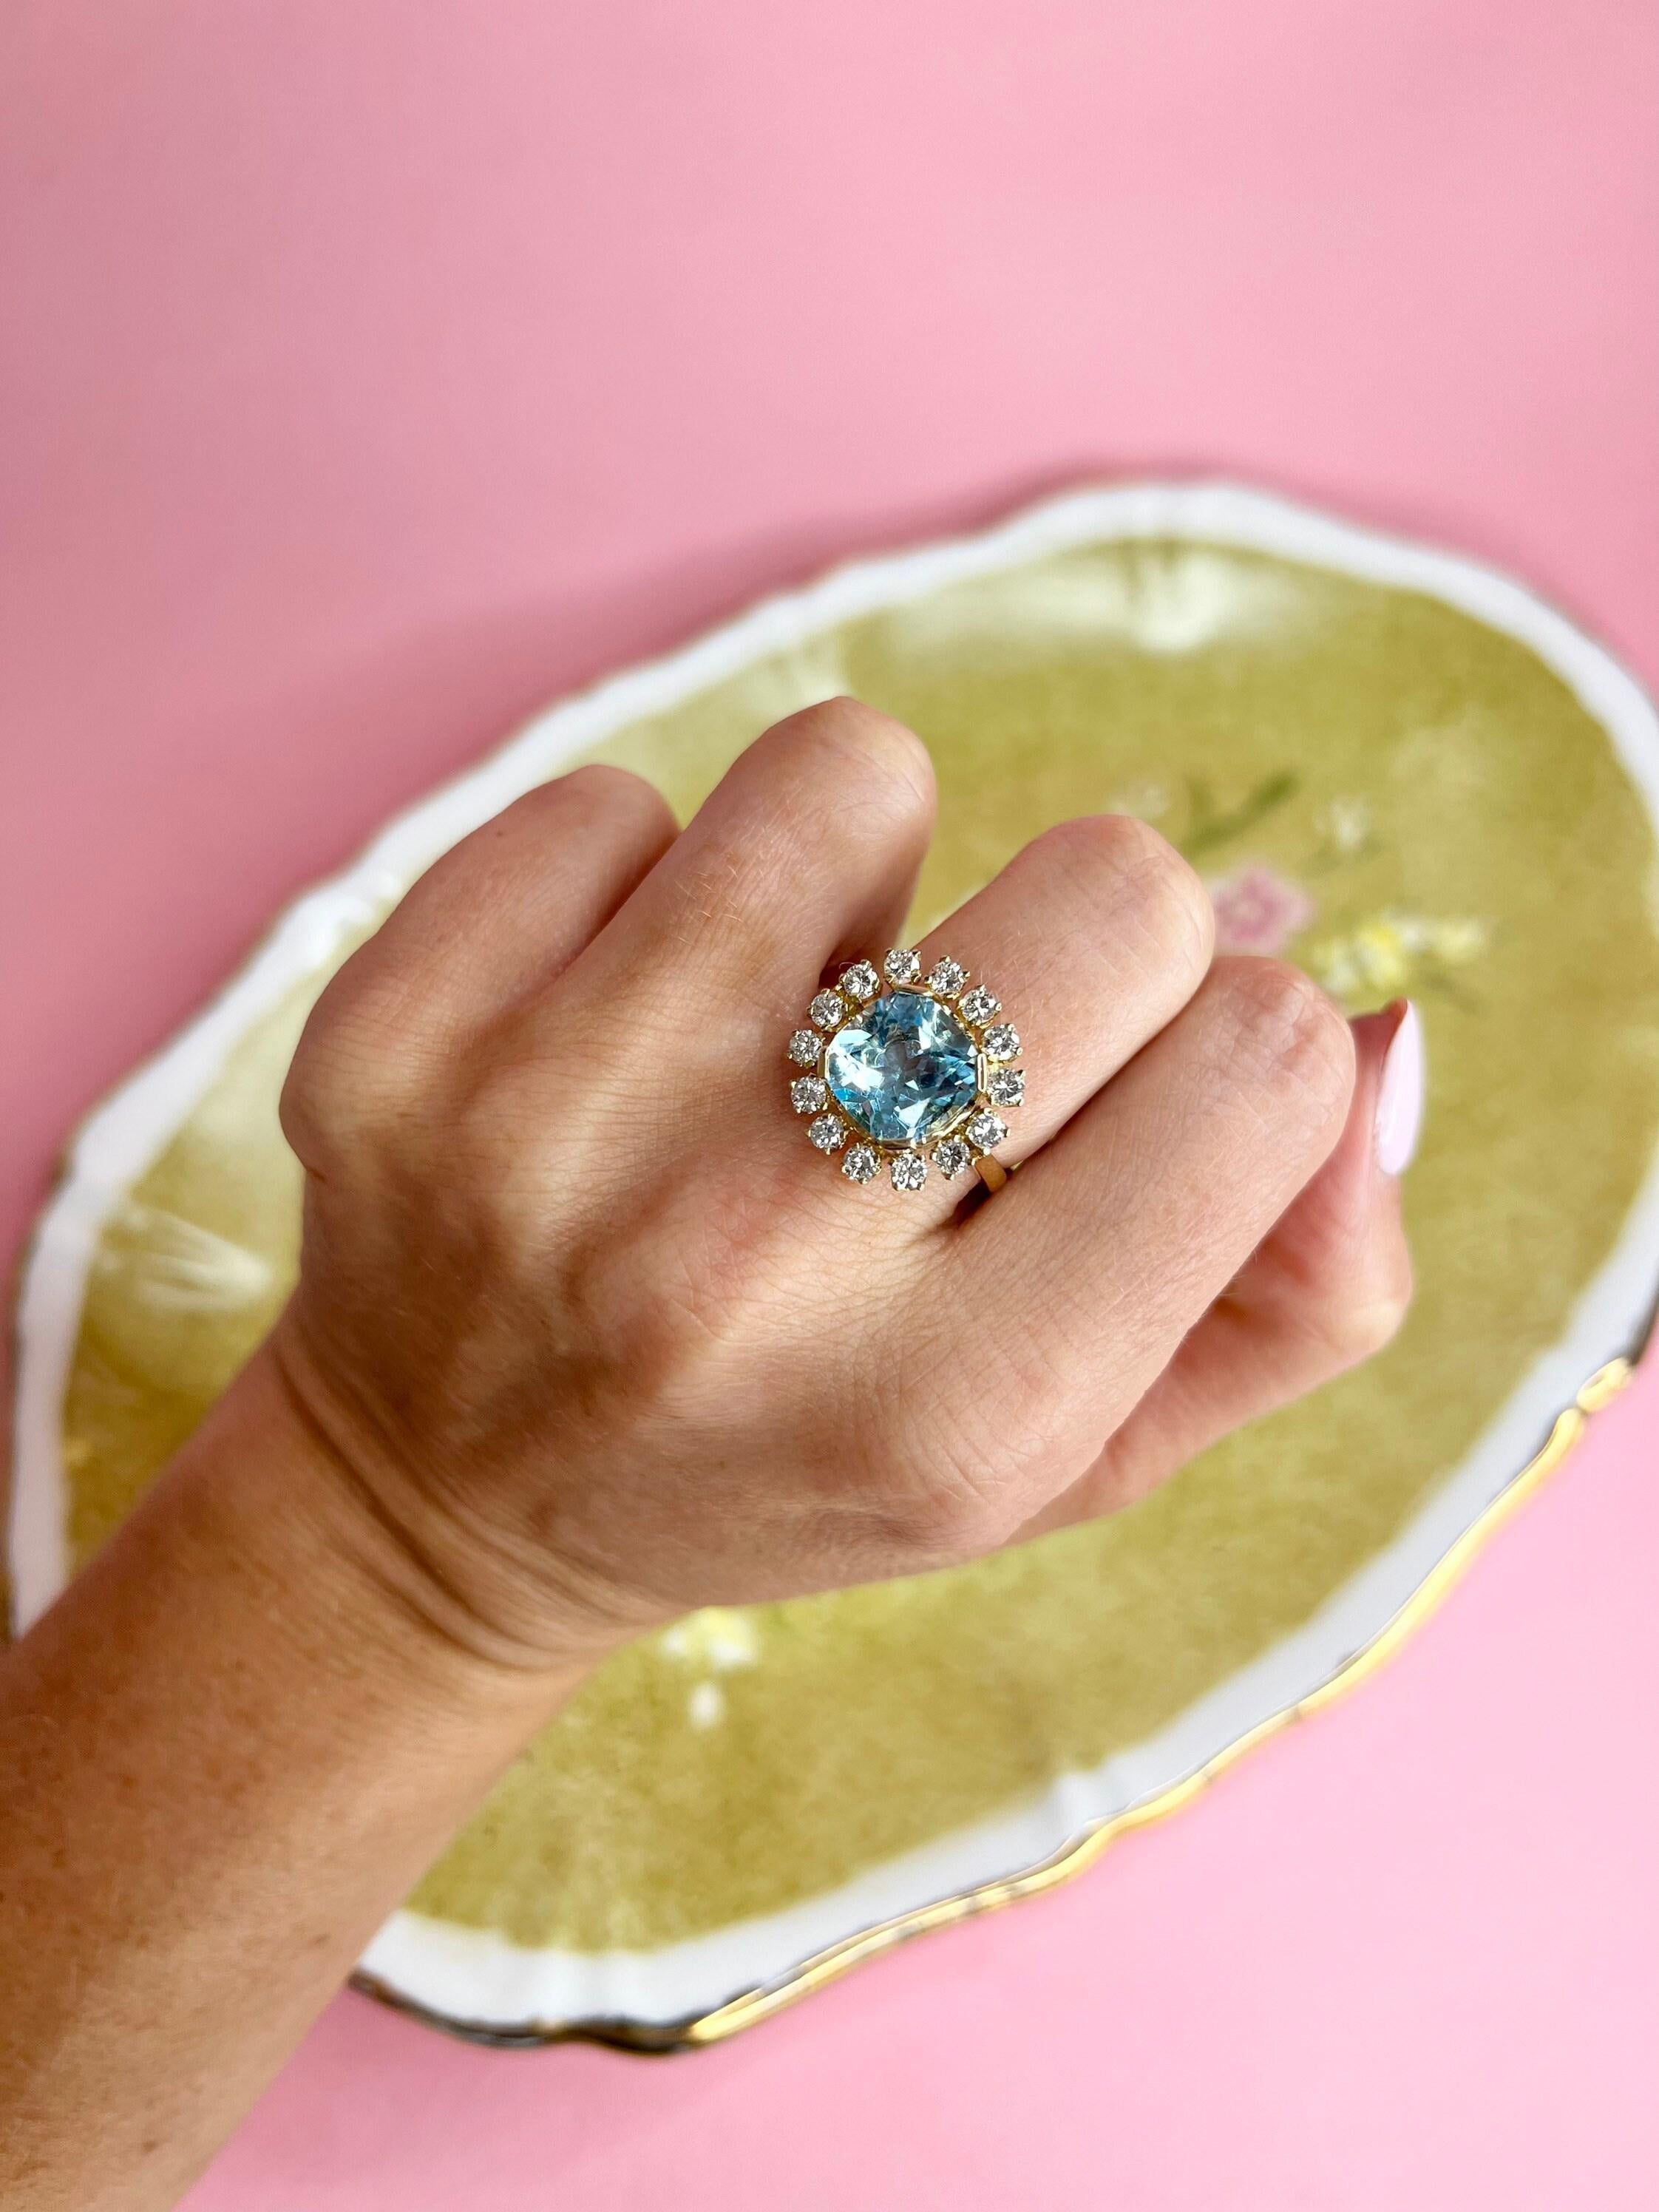 Vintage 18ct Gold Blue Topaz & Diamond Statement Ring

18ct Gold Stamped 

Circa 1980’s

Beautiful, Vintage Blue Topaz & Diamond Statement Ring. 
Set with a Large Centre Topaz, Measuring Approximately 9.7mm x 9.7mm. Surrounded by a Halo of Gorgeous